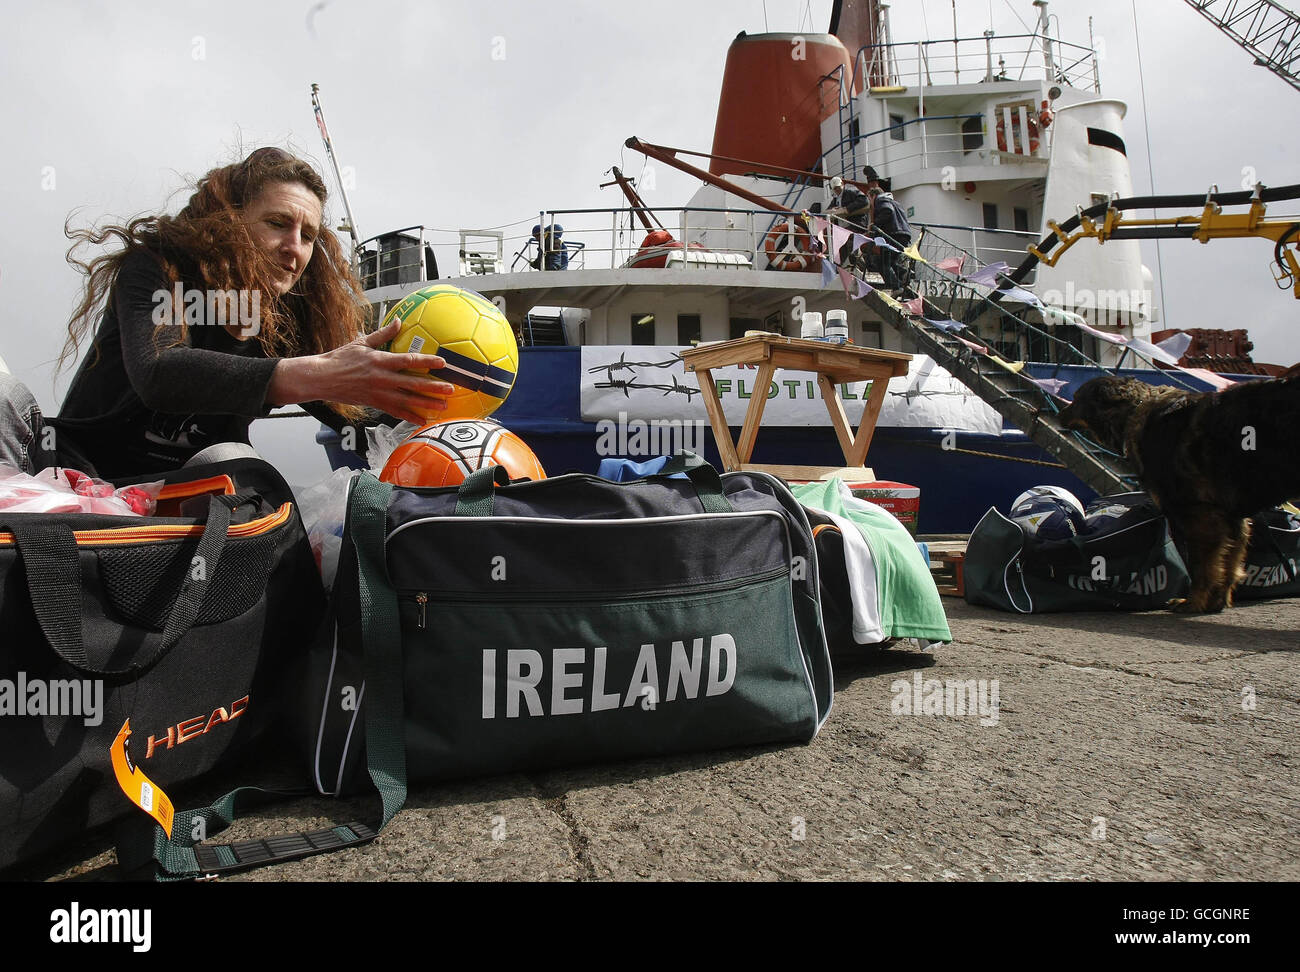 Activist Naimh Moloughney packs bags to be loaded into the Cargo ship the MV Rachel Corrie named after a after a human rights activist killed by the Israeli military, before departing from Dundalk Harbour for the Middle East with a cargo of cement and supplies for Gaza. Stock Photo